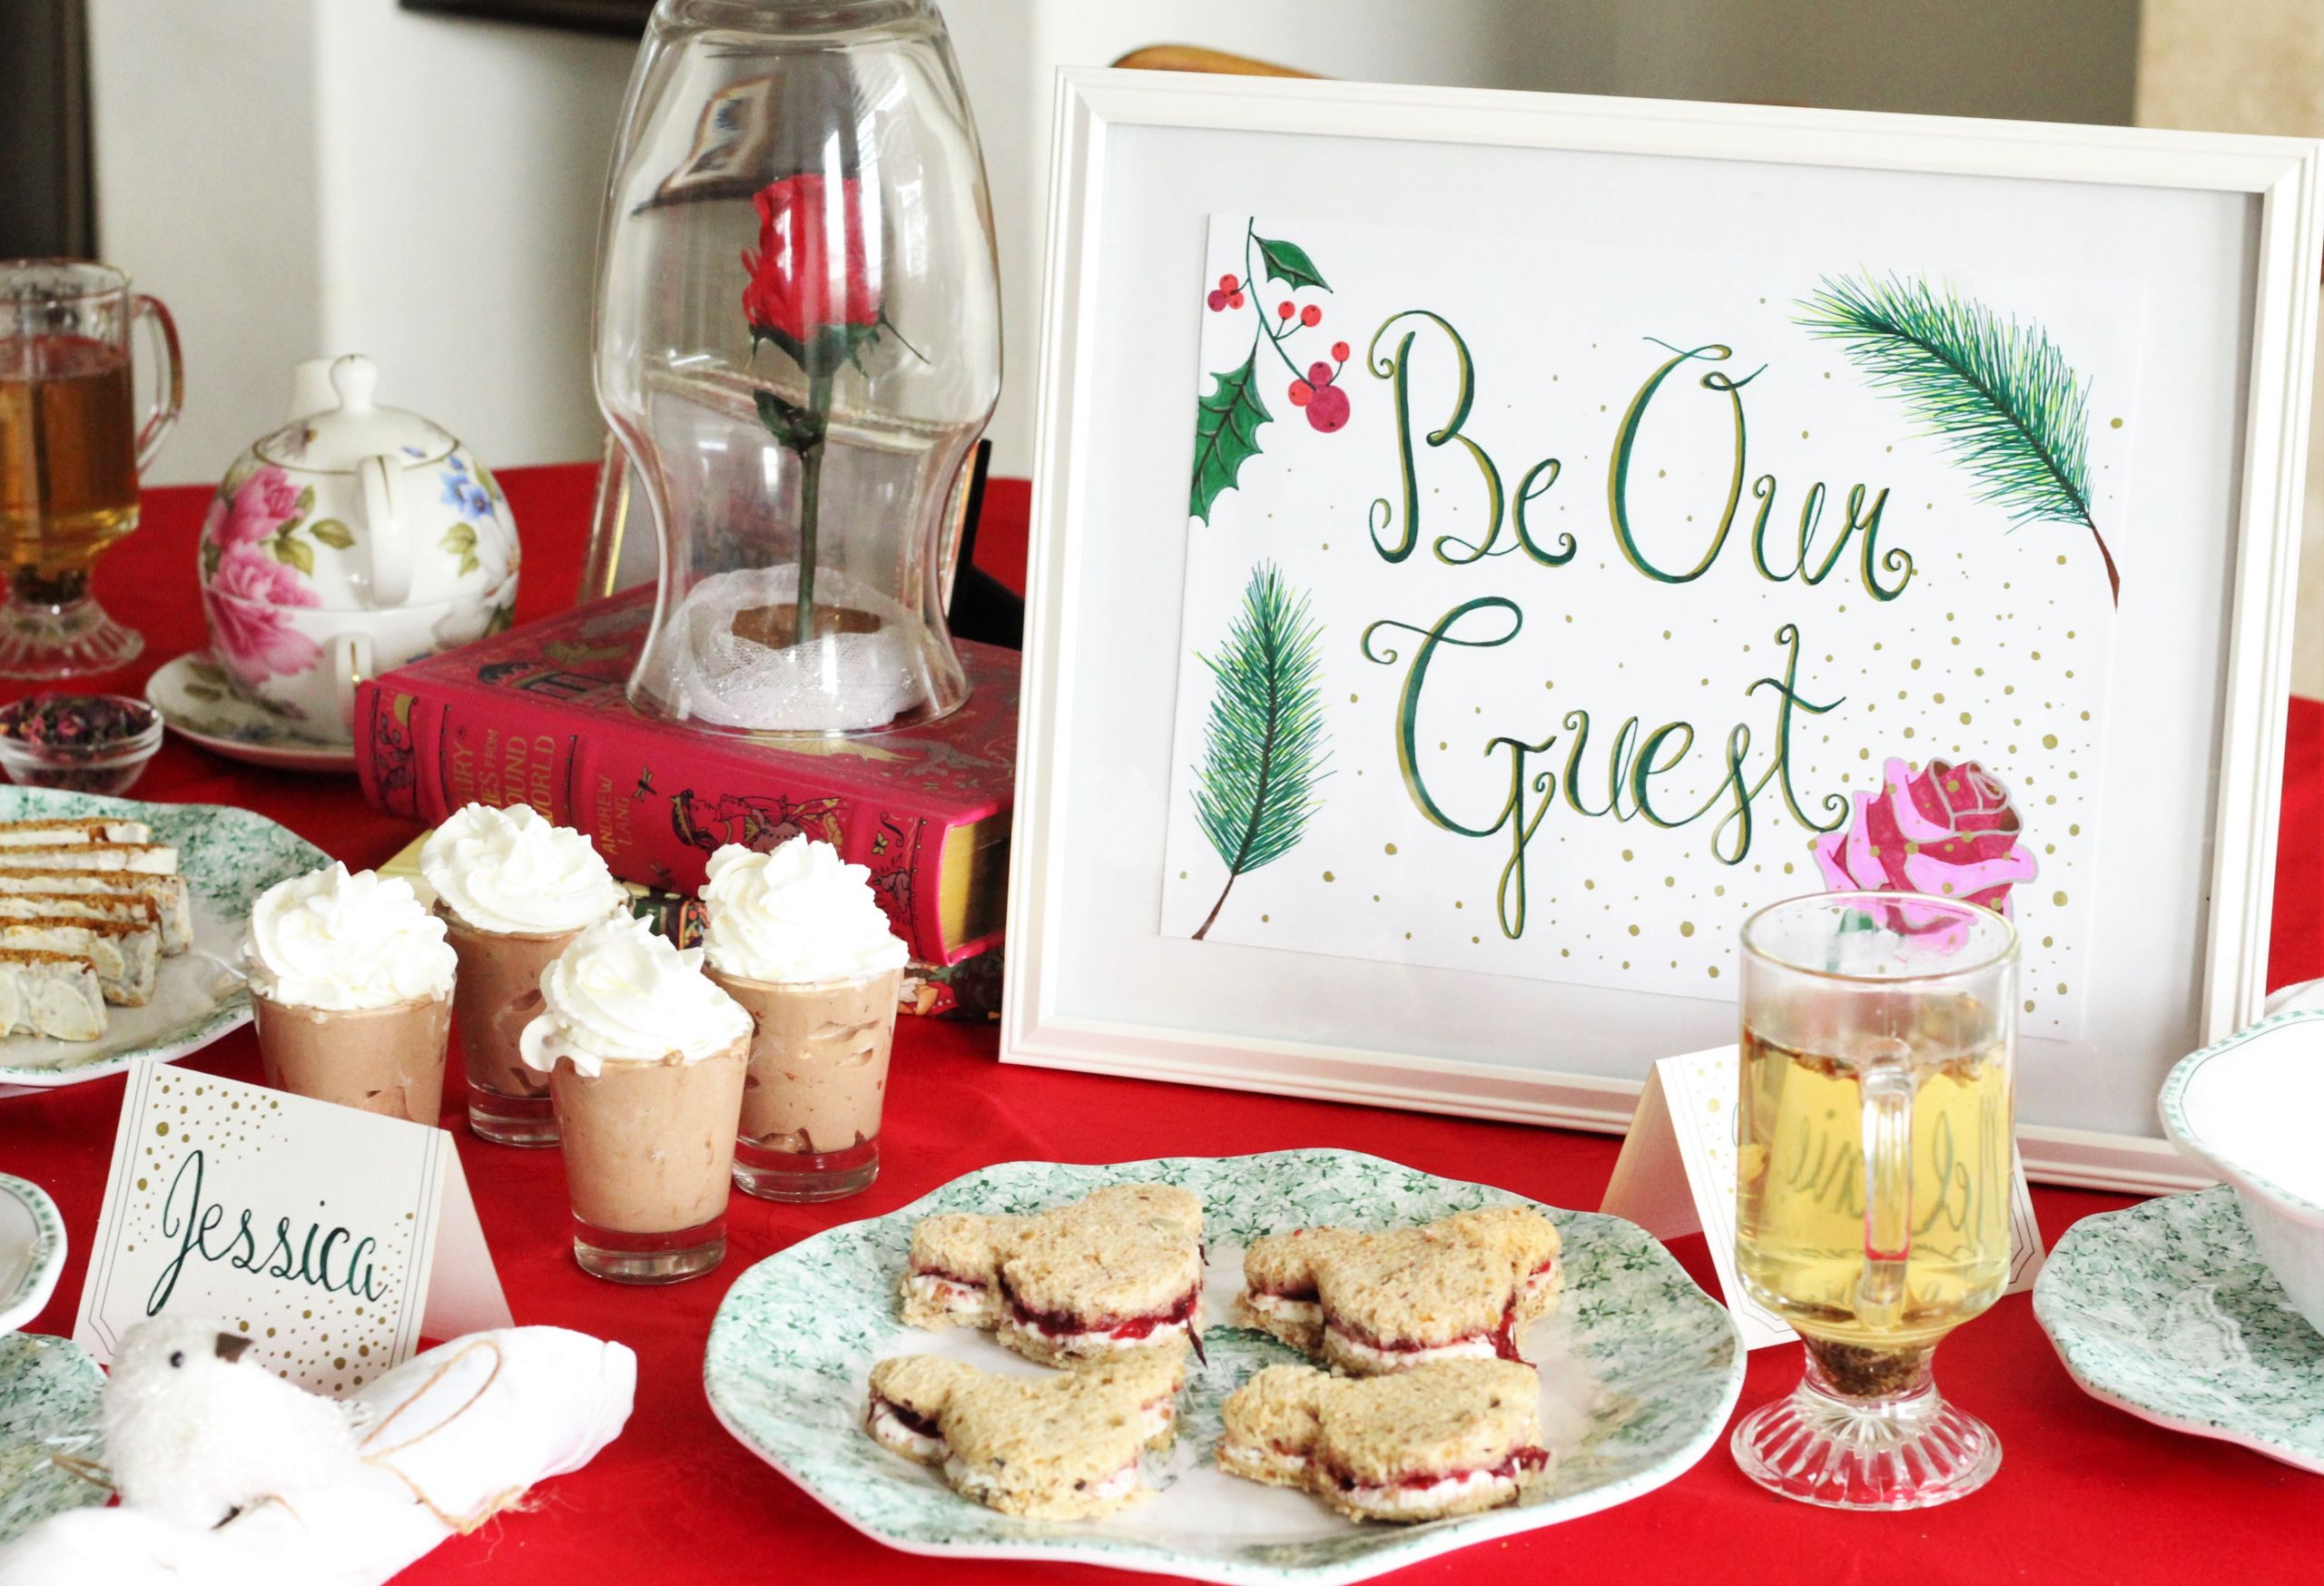 Holiday Tea Party Ideas
 A Beauty & the Beast Holiday Tea Party The Healthy Mouse